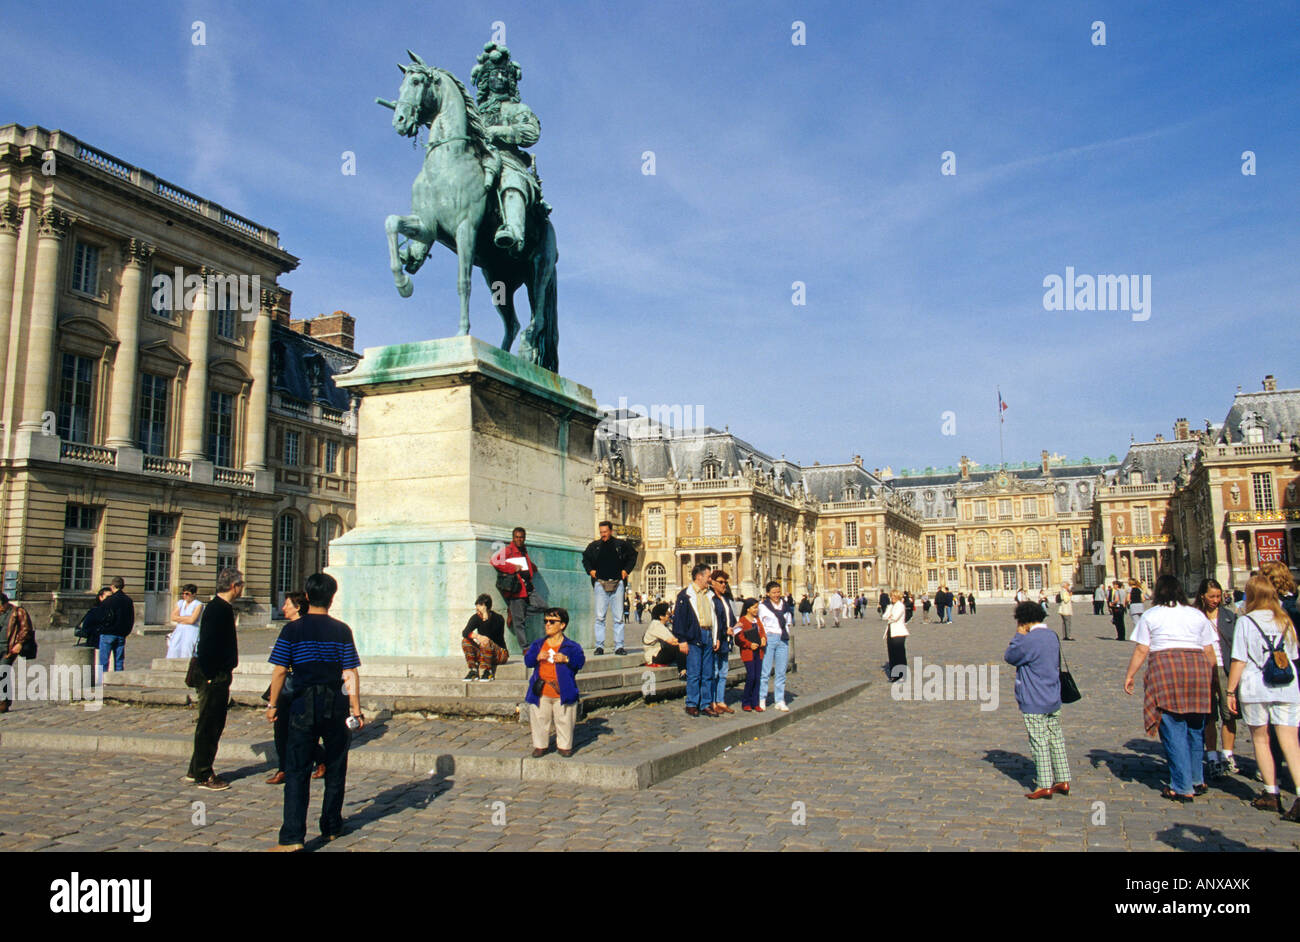 Statue of Louis XIV at the Palace of Versailles, France Stock Photo